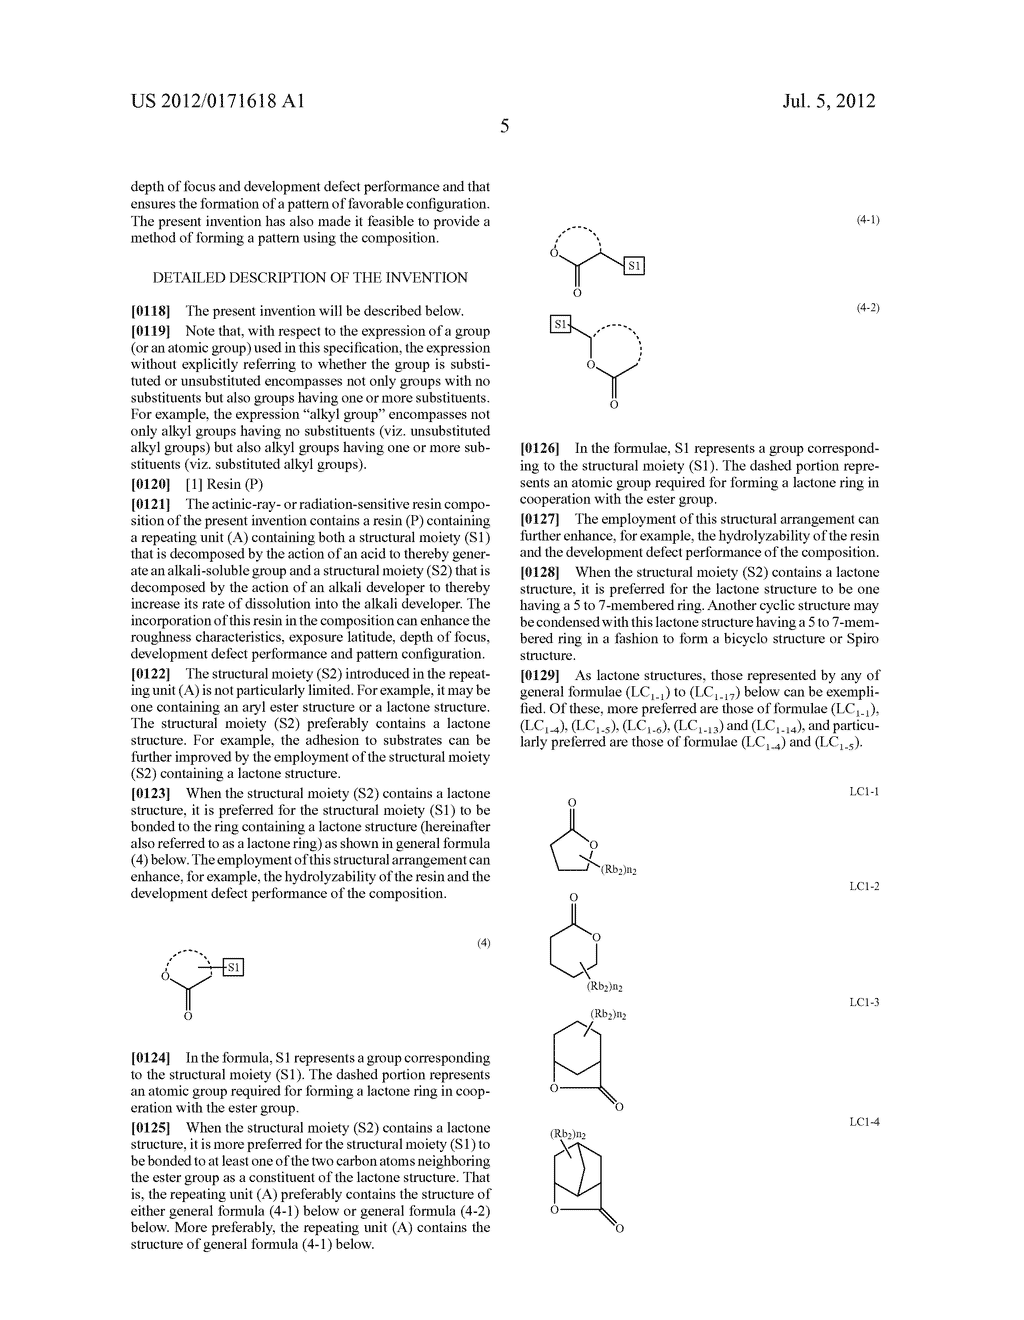 ACTINIC-RAY- OR RADIATION-SENSITIVE RESIN COMPOSITION AND METHOD OF     FORMING A PATTERN USING THE SAME - diagram, schematic, and image 06